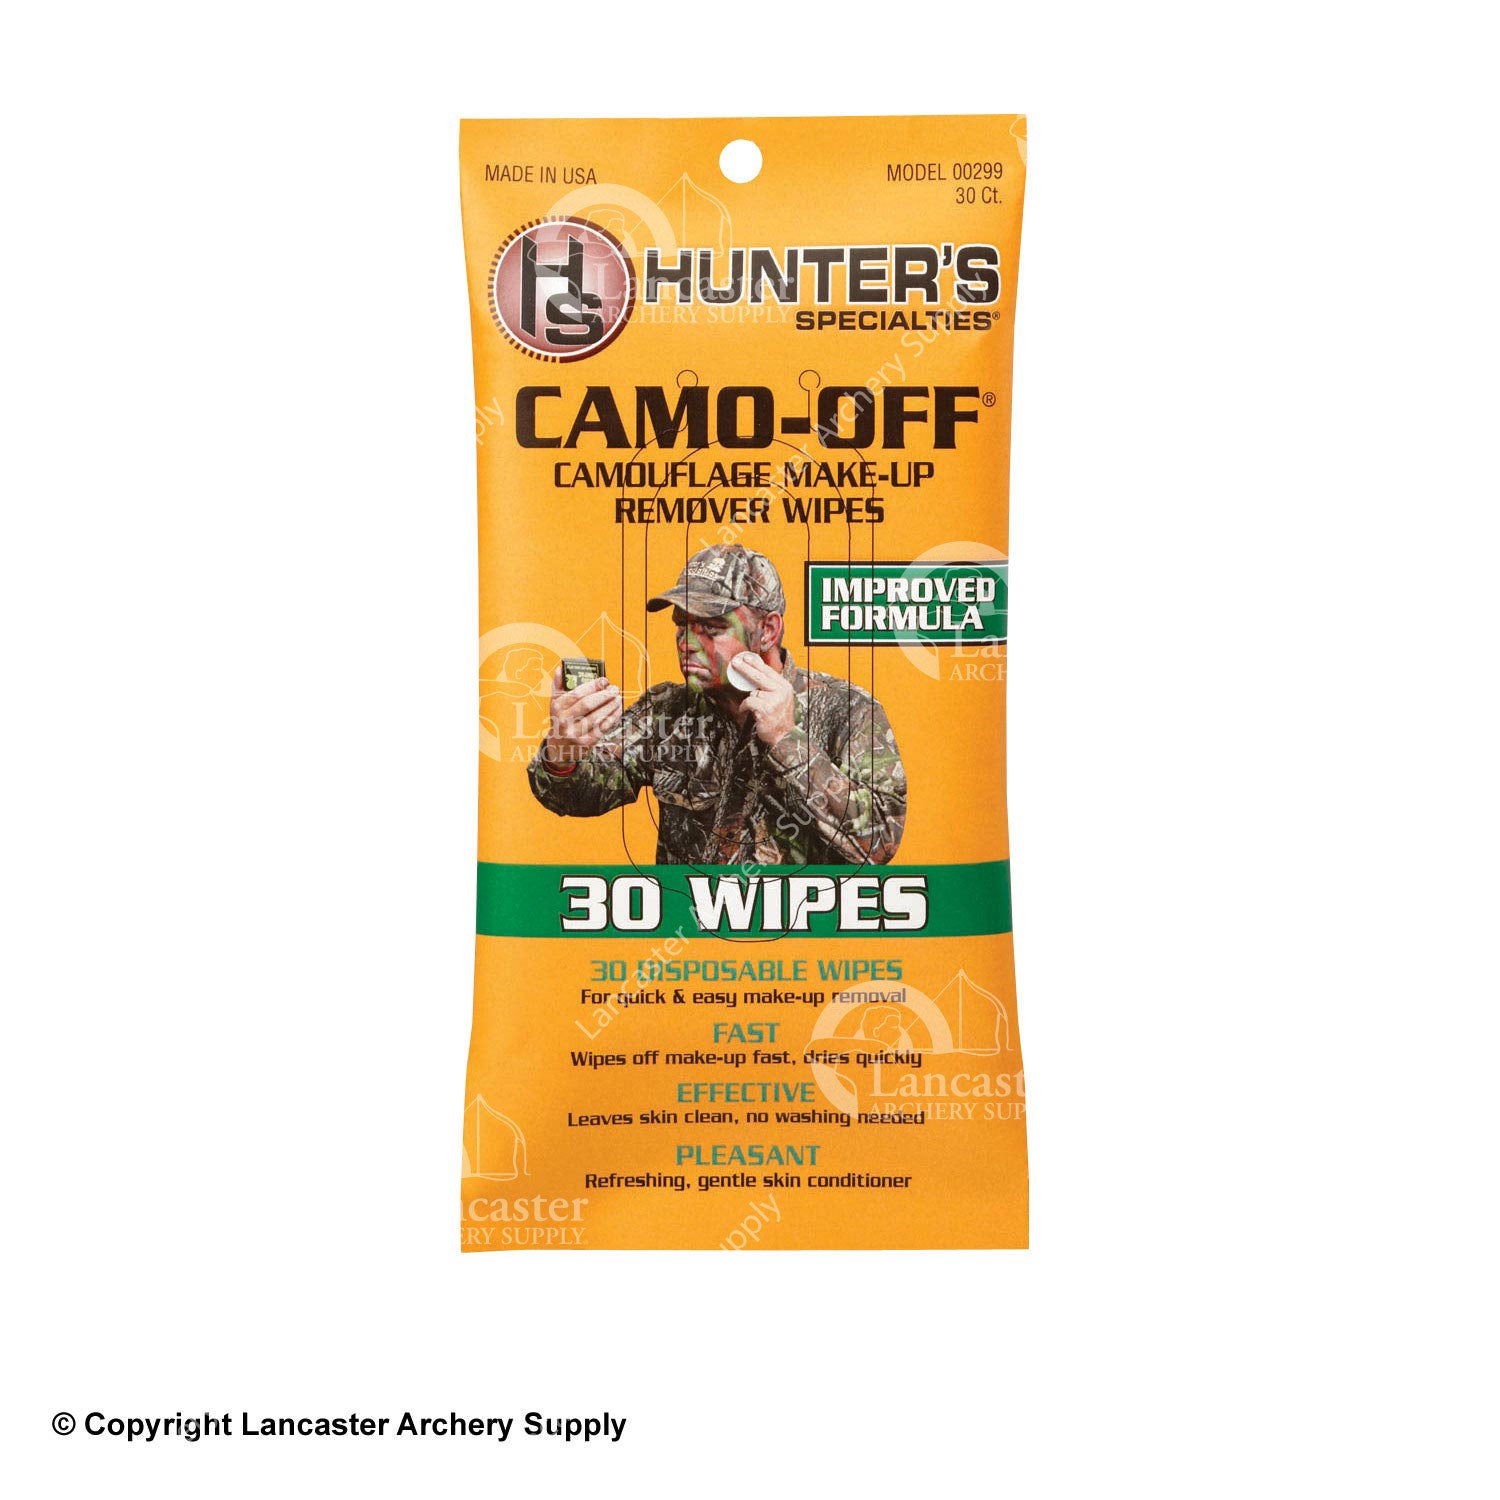 Hunters Specialties Camo-Off Make Up Remover Wipes